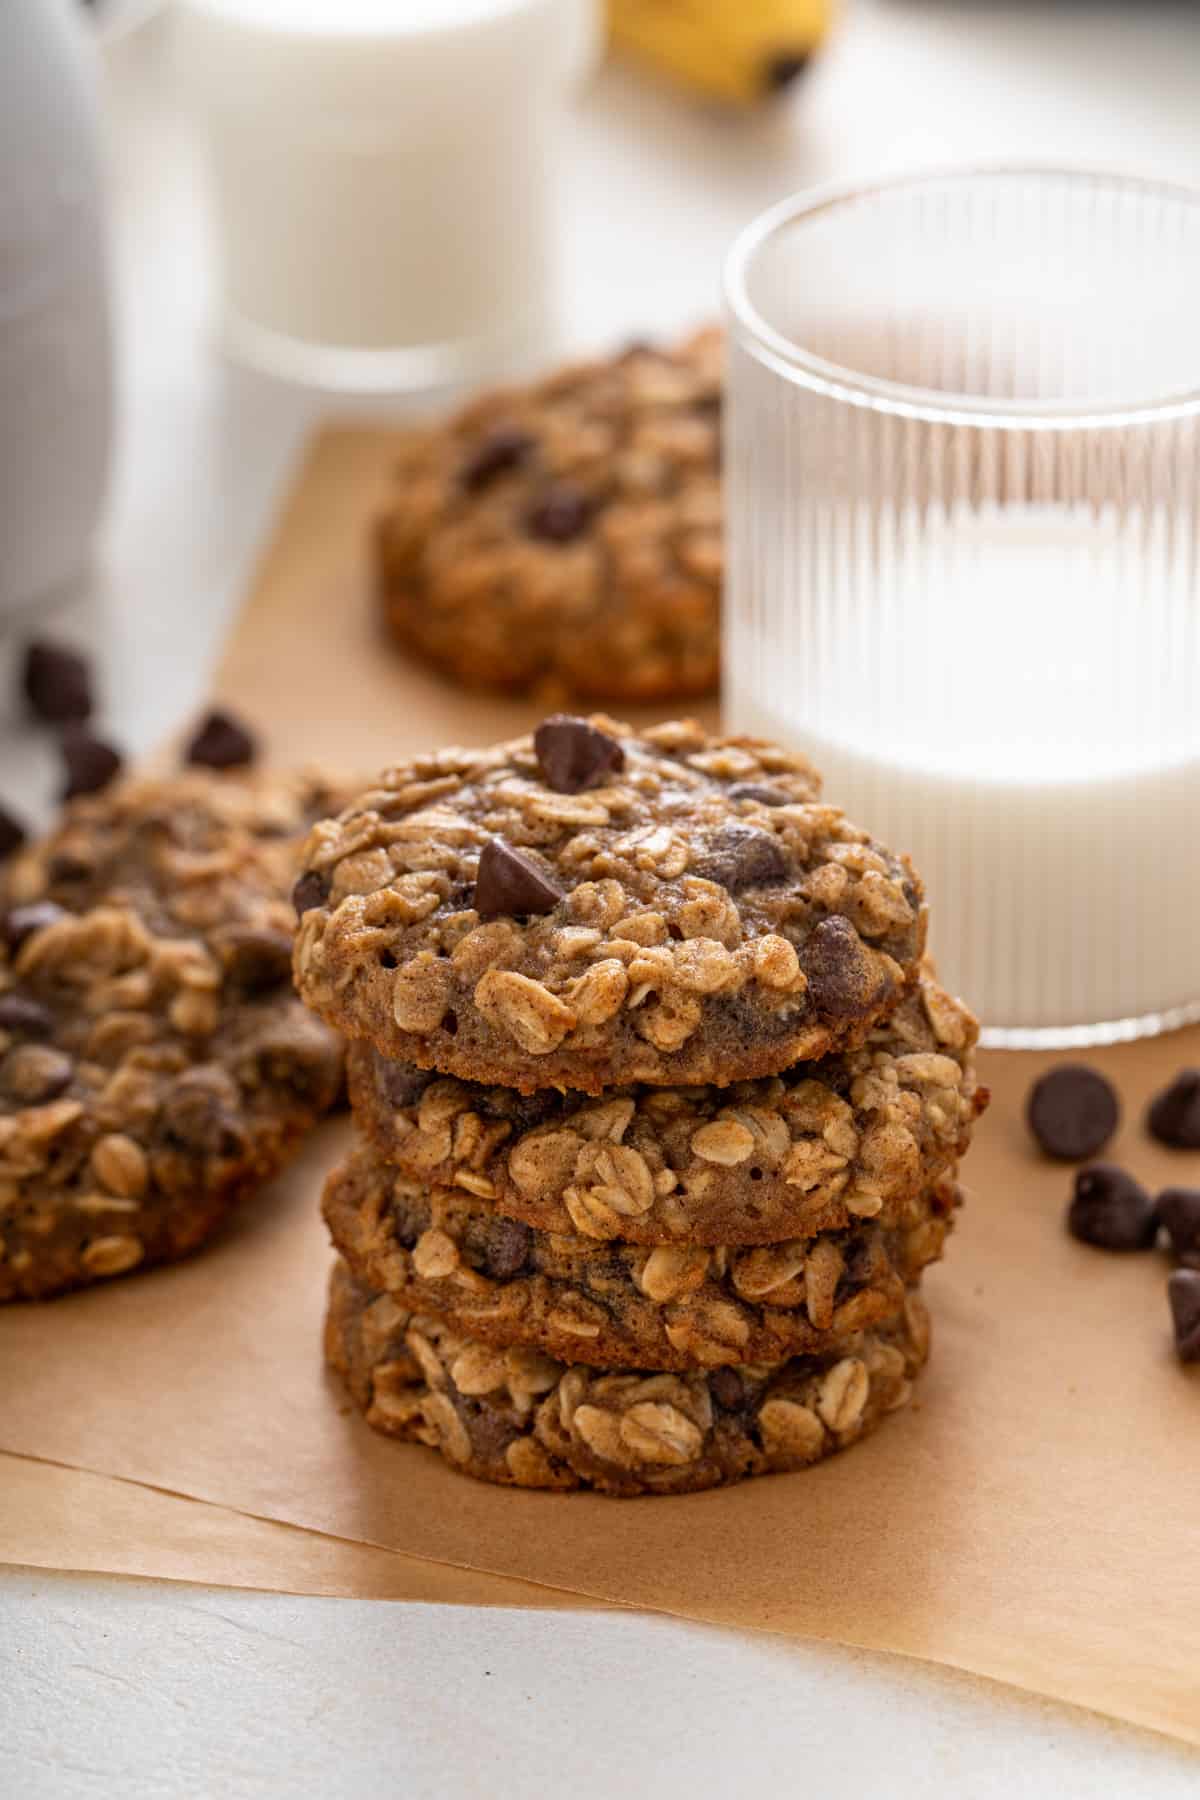 Four banana oatmeal cookies stacked on a piece of parchment paper in front of a glass of milk.